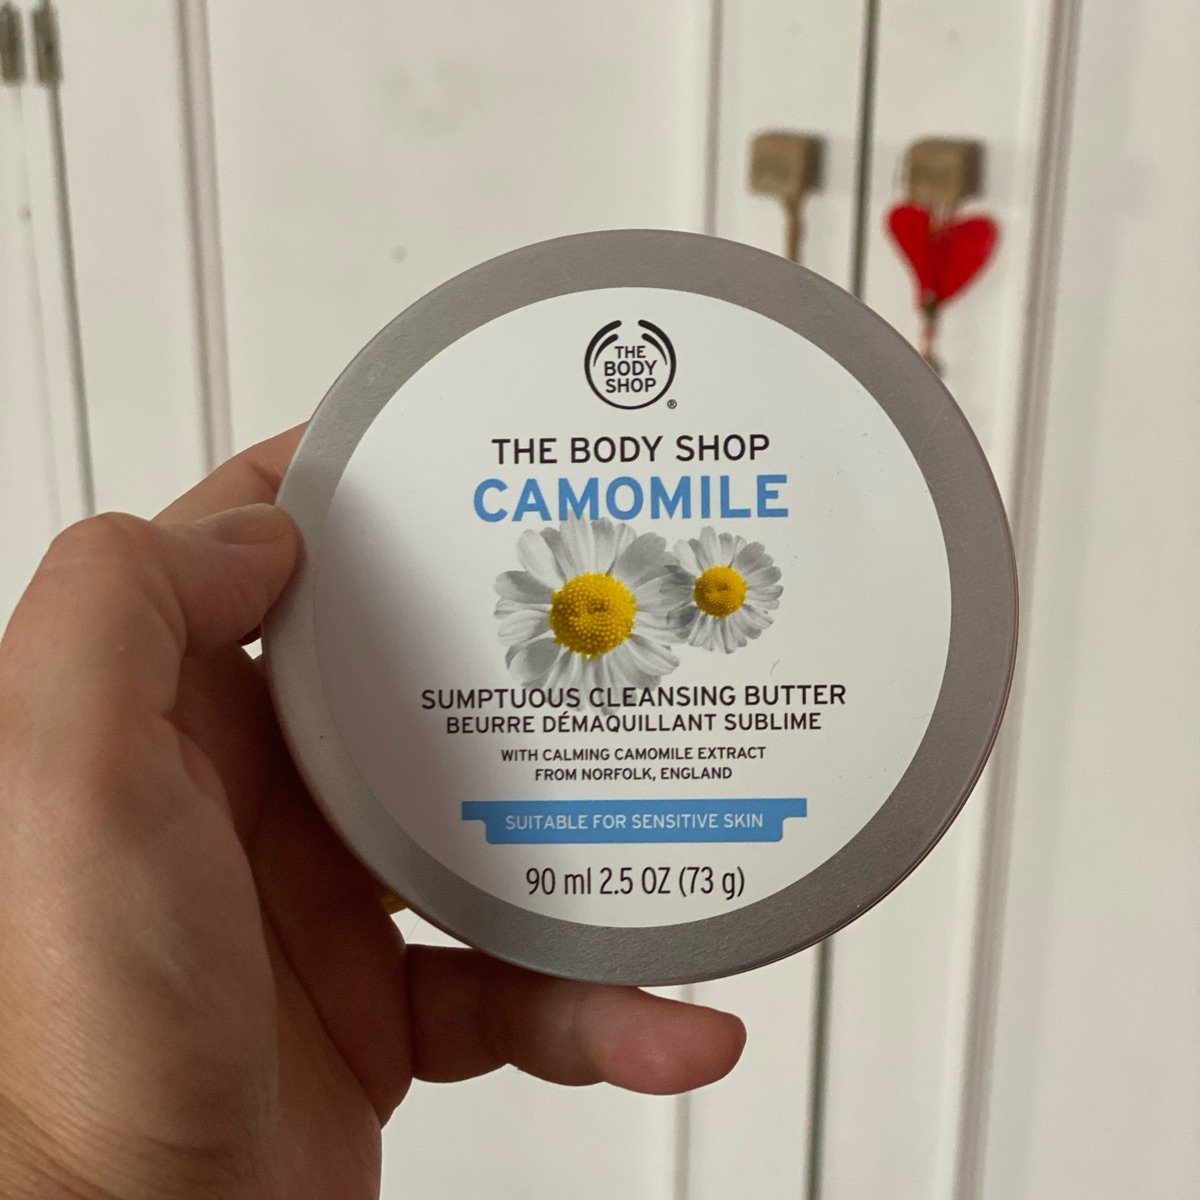 The Body Shop Camomile Sumptuous Cleansing Butter Review | abillion